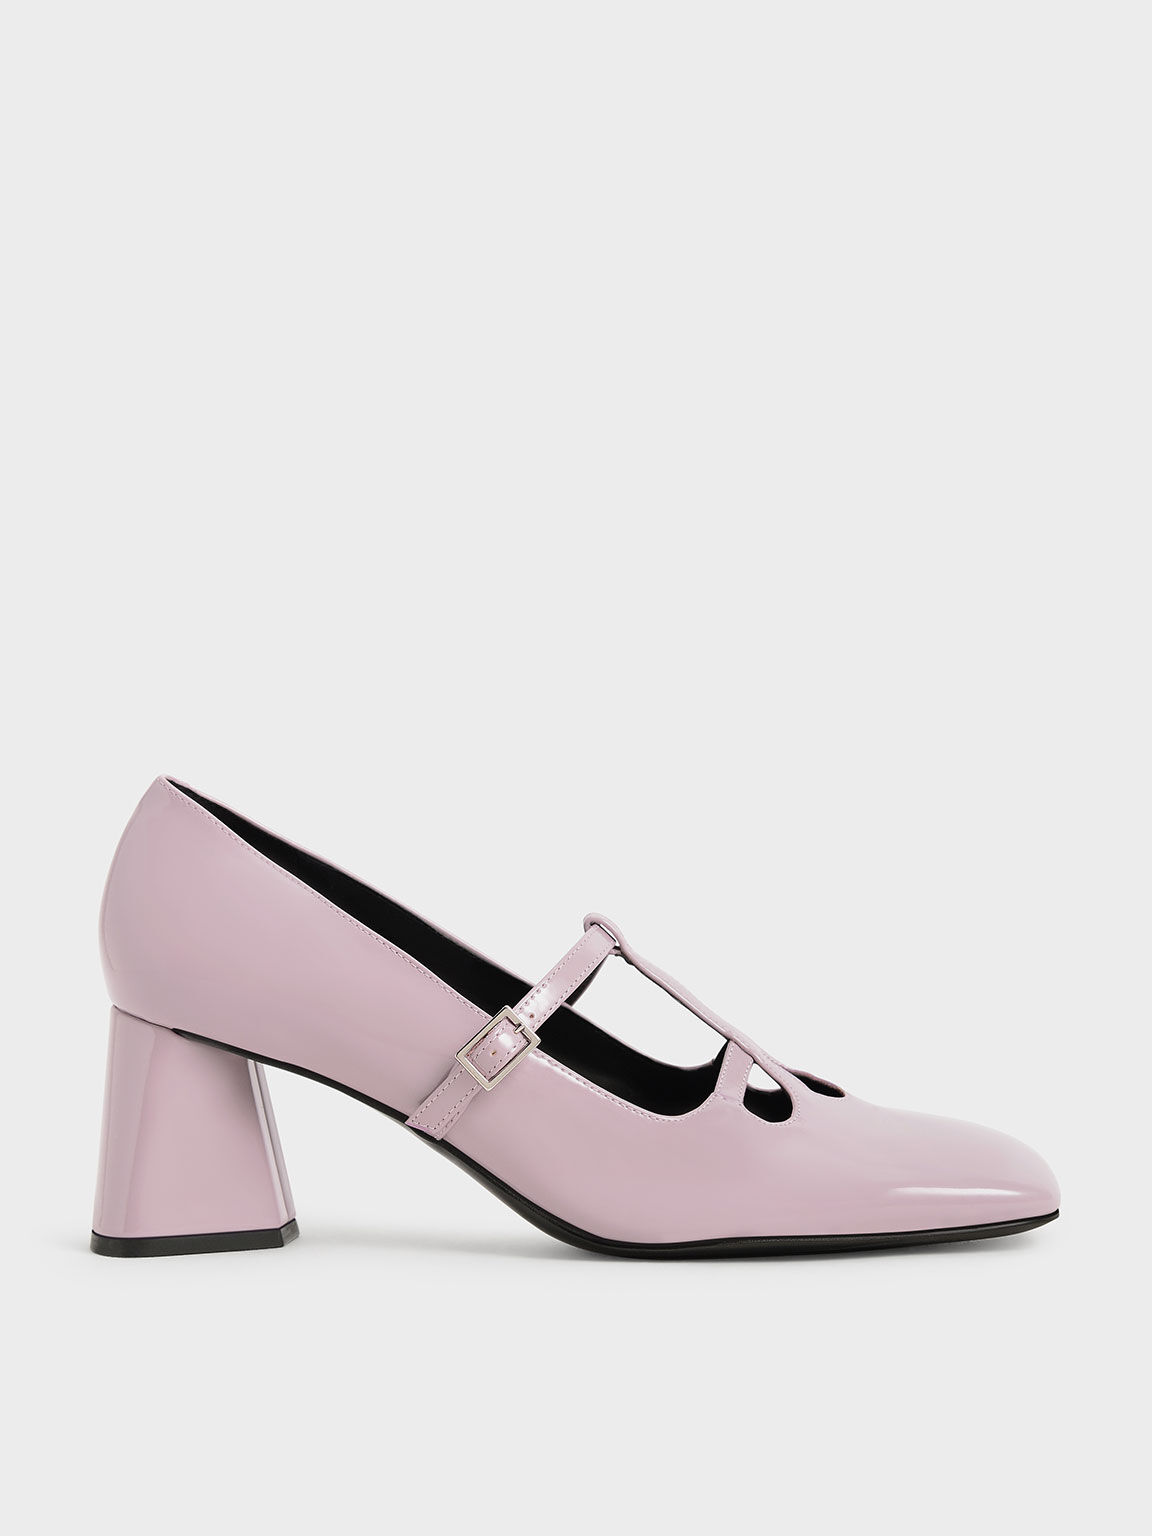 Patent Double Strap Mary Jane Pumps, Lilac, hi-res